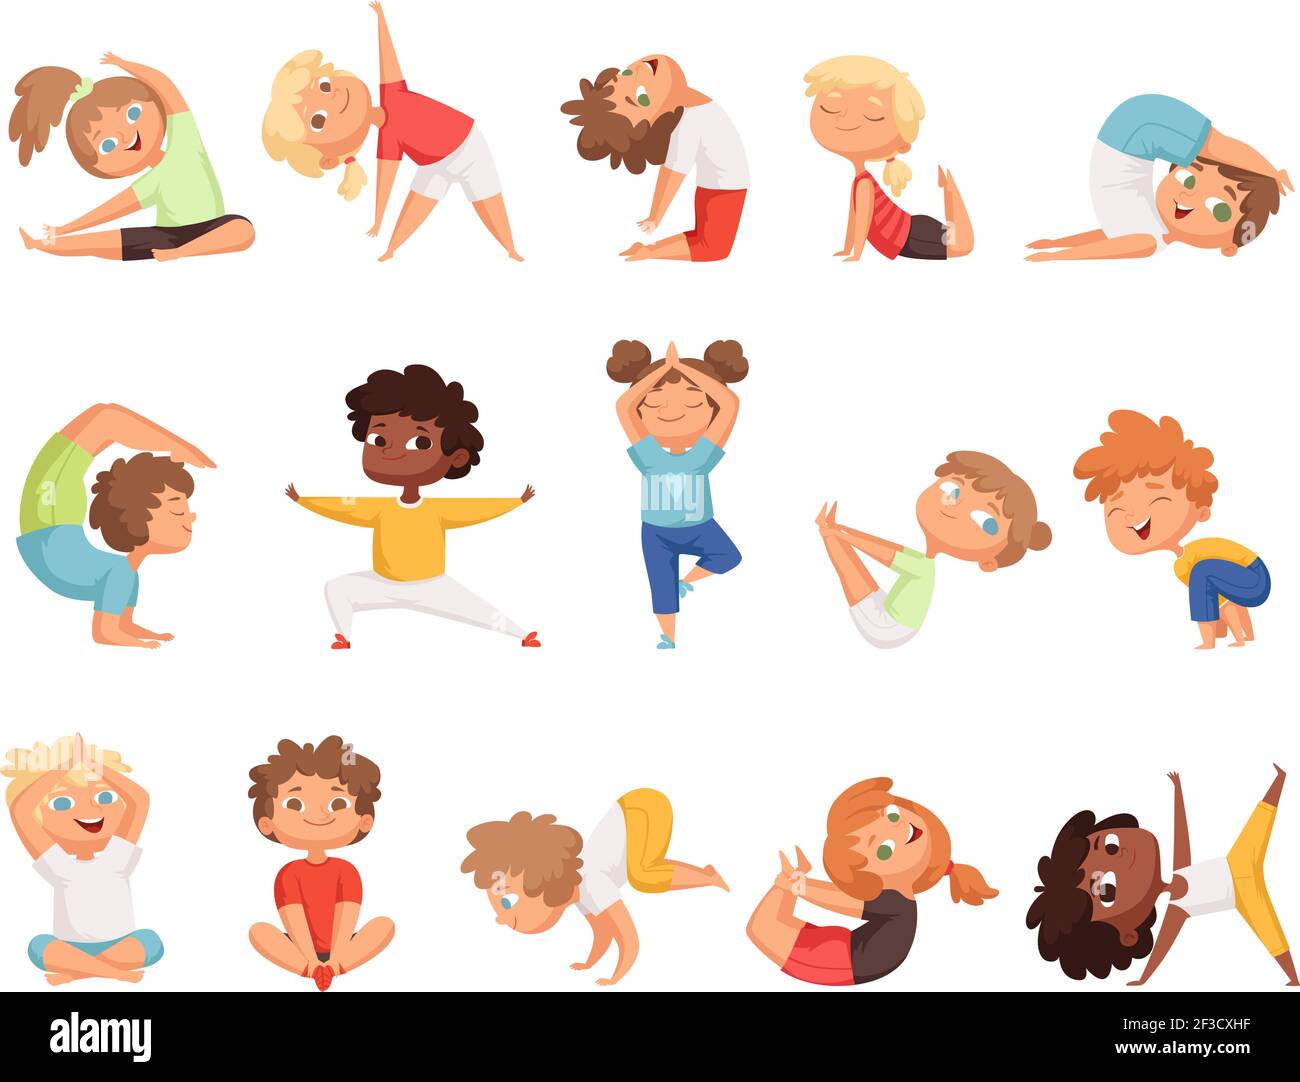 Yoga kids. Children making exercises in different poses healthy sport vector cartoon characters Stock Vector